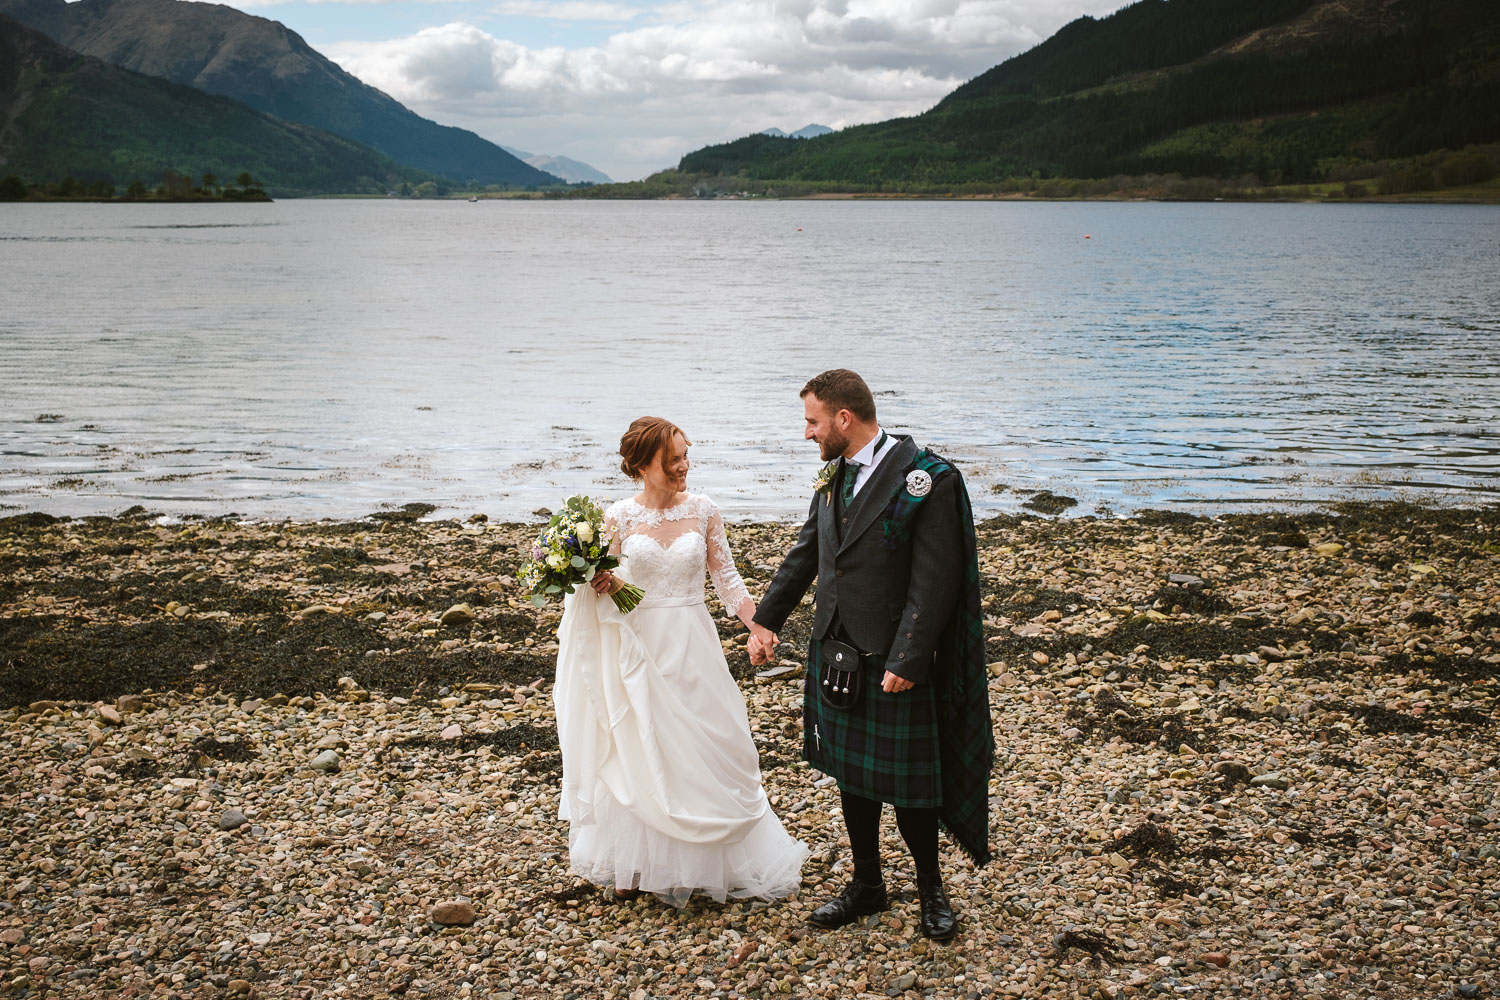 First look on the shores of Loch Leven.